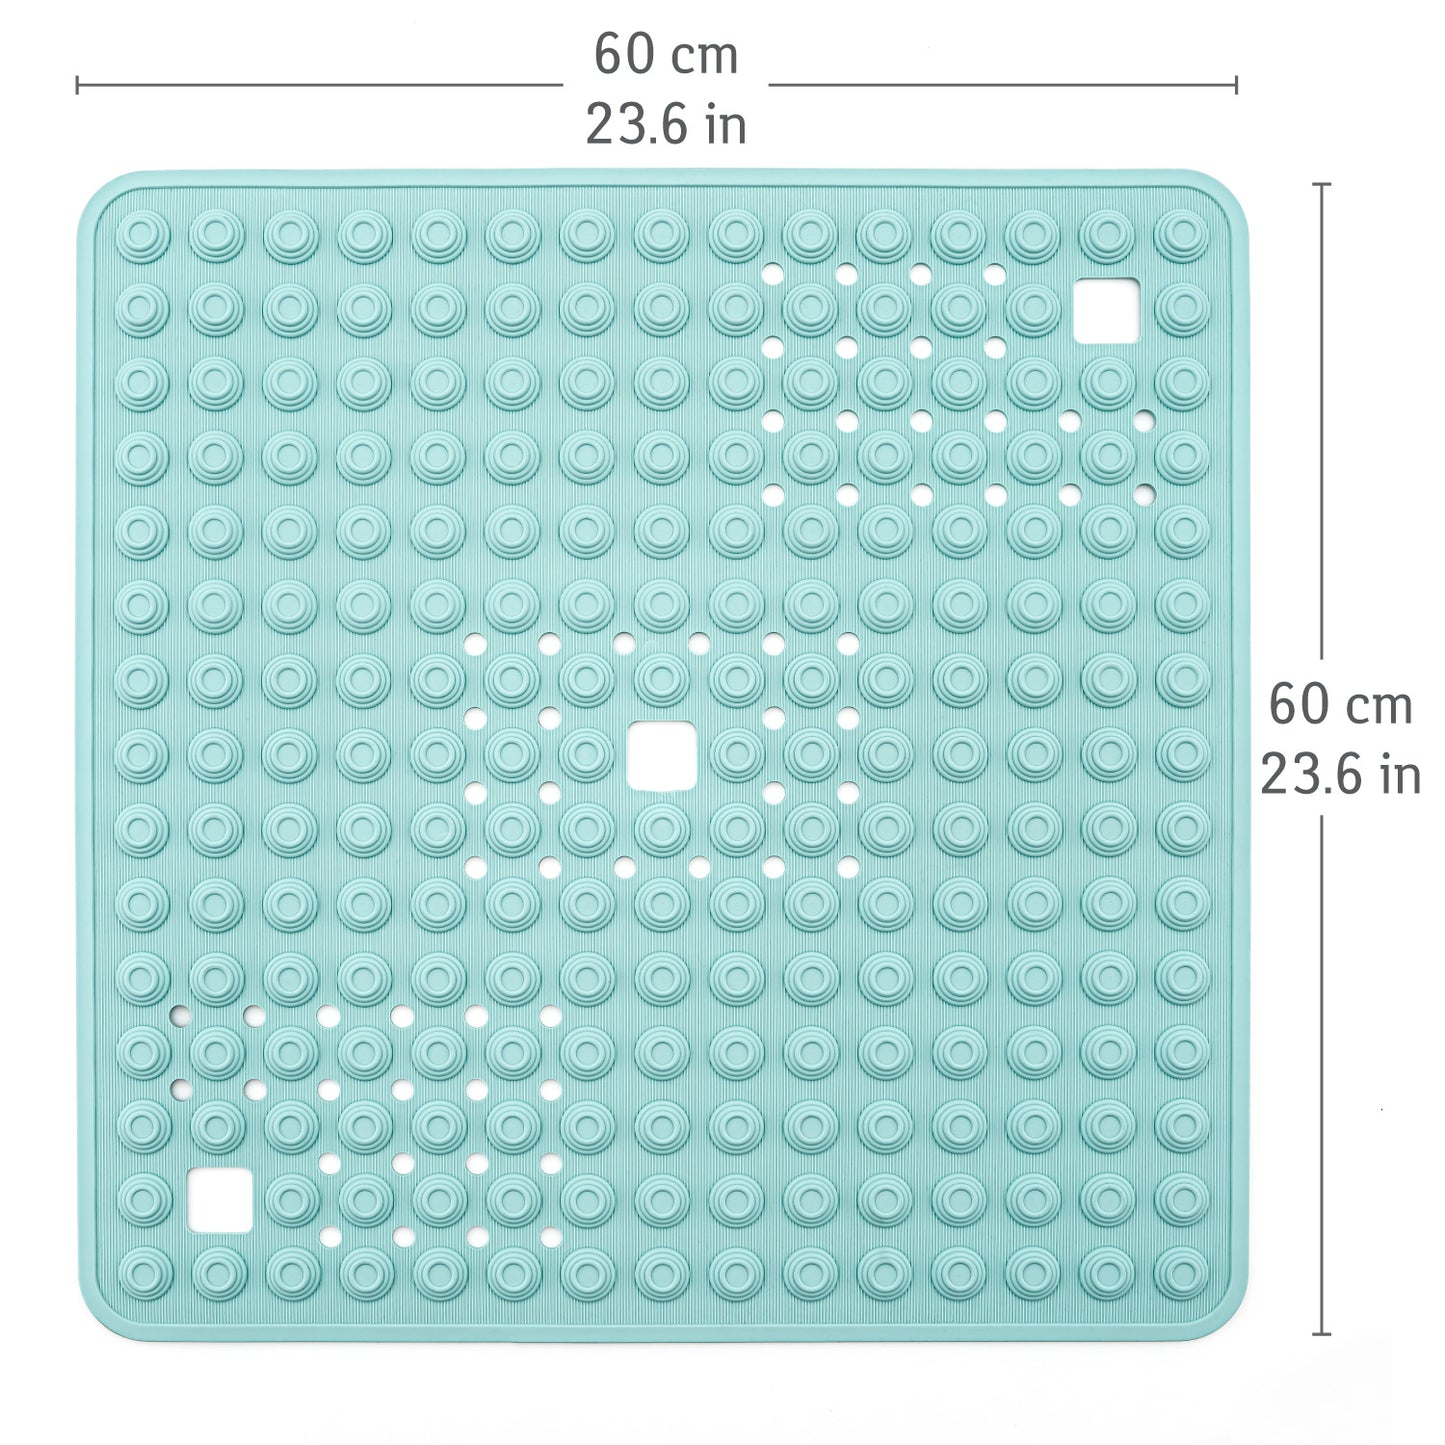 Tatkraft Detail - Heavy Duty Shower Mat Non Slip, Rubber Shower & Bathtub Mat with 134 Powerful Suction Cups, 60x60 cm, Blue, Made in Italy